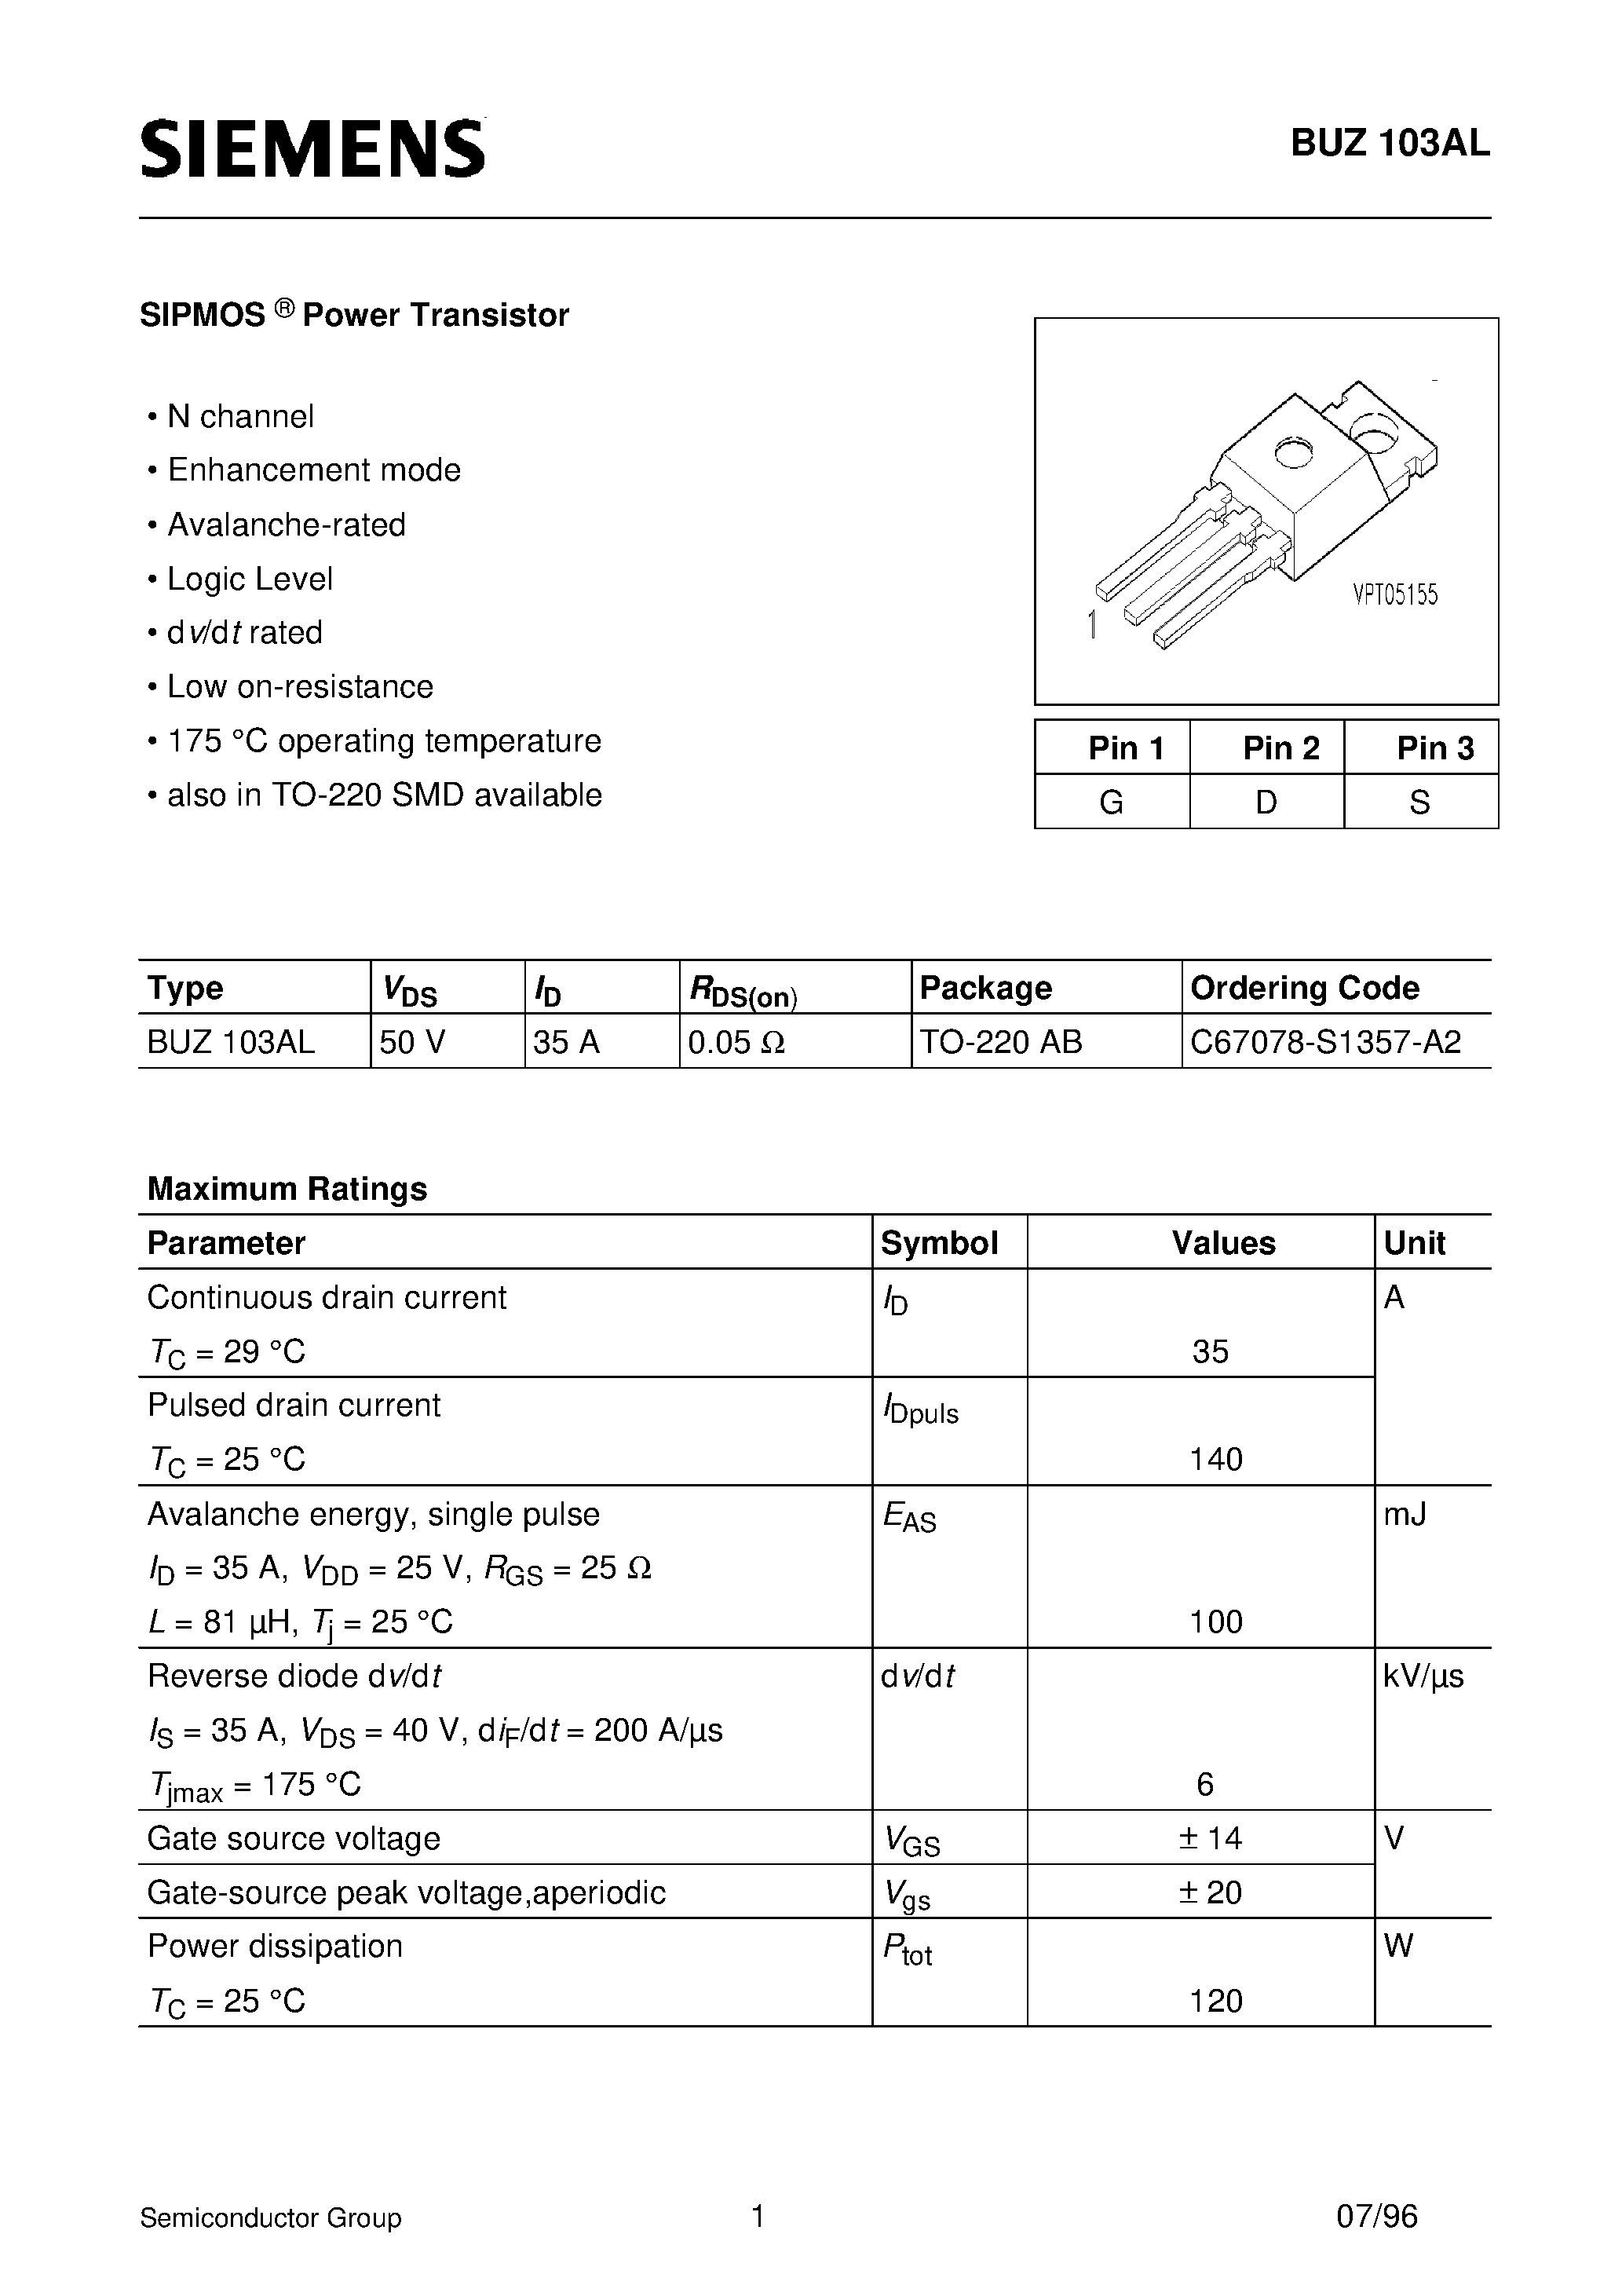 Datasheet BUZ103AL - SIPMOS Power Transistor (N channel Enhancement mode Avalanche-rated Logic Level d v/d t rated) page 1